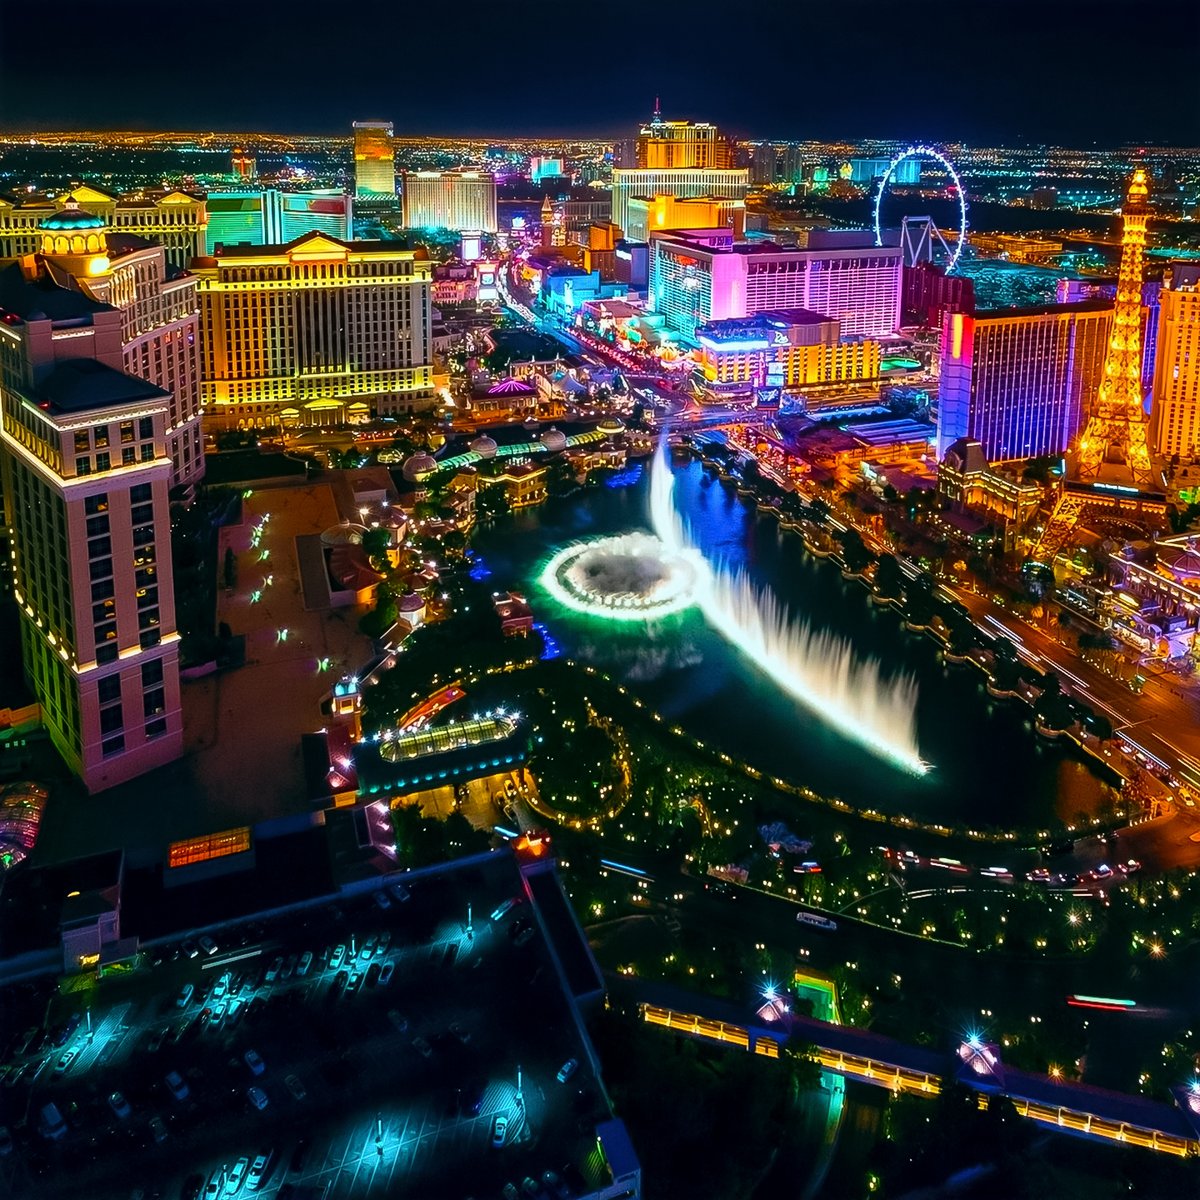 Named one of the top North American locations for meetings and conferences by Cvent, Las Vegas is home to 3 of the 10 largest convention centers in the US and boasts more than 10.8 million square feet of event space. #BusinessTravel #EventPlanning #EventProduction